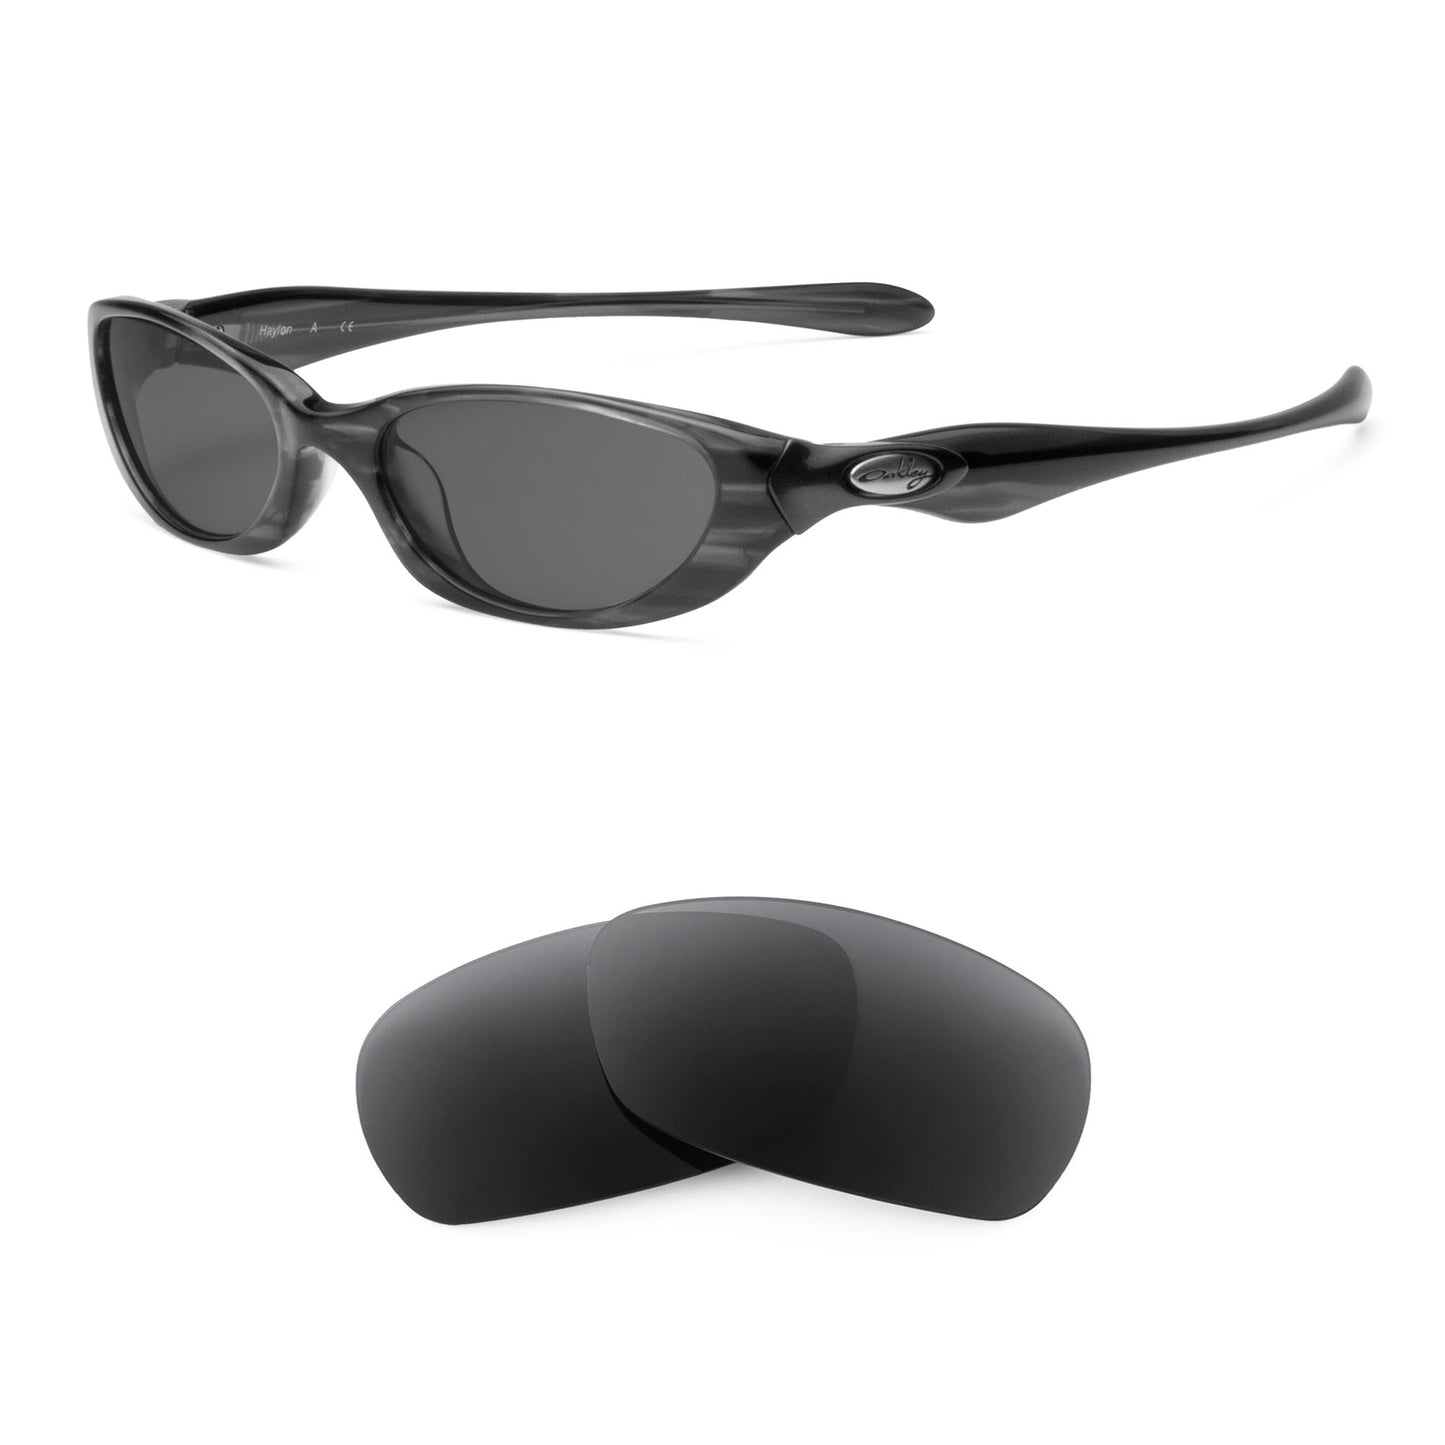 Oakley Haylon sunglasses with replacement lenses